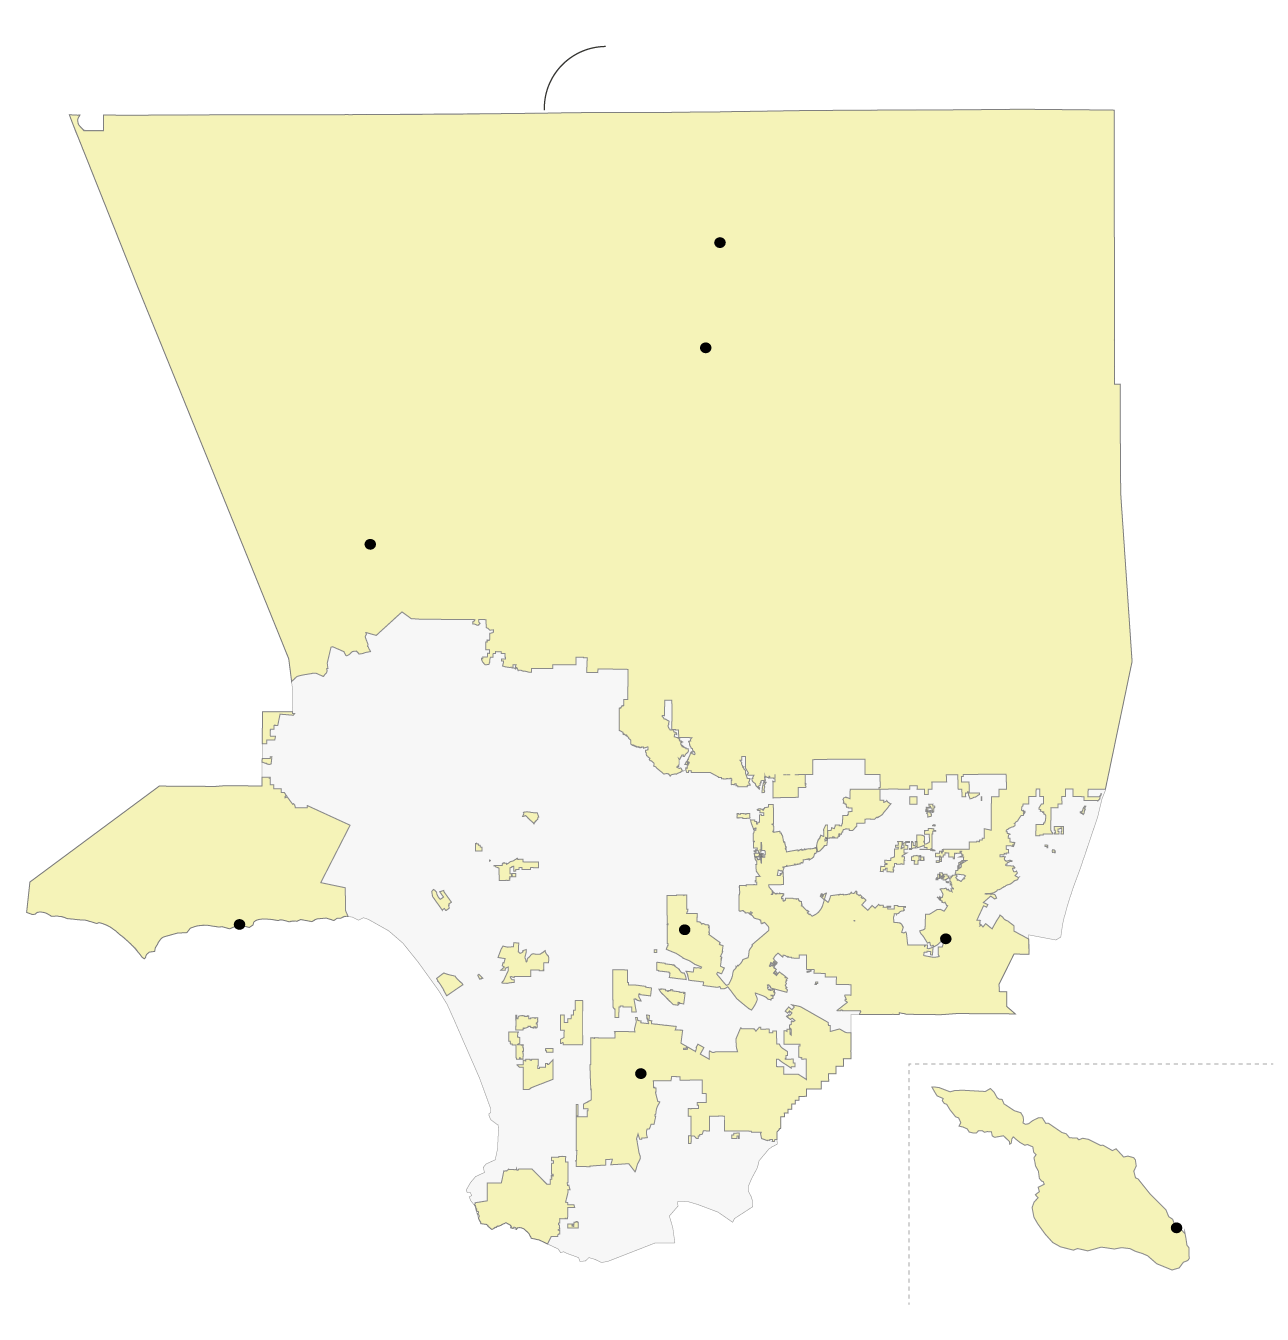 A map of Los Angeles County that shows areas where the Los Angeles Sheriff’s Department patrols the area. This area includes the northernmost areas of the County, along with a patchwork of areas in East and South L.A. Lancaster, Palmdale, Santa Clarita, Malibu, East Los Angeles, Walnut, Compton, and Avalon are in this jurisdiction.